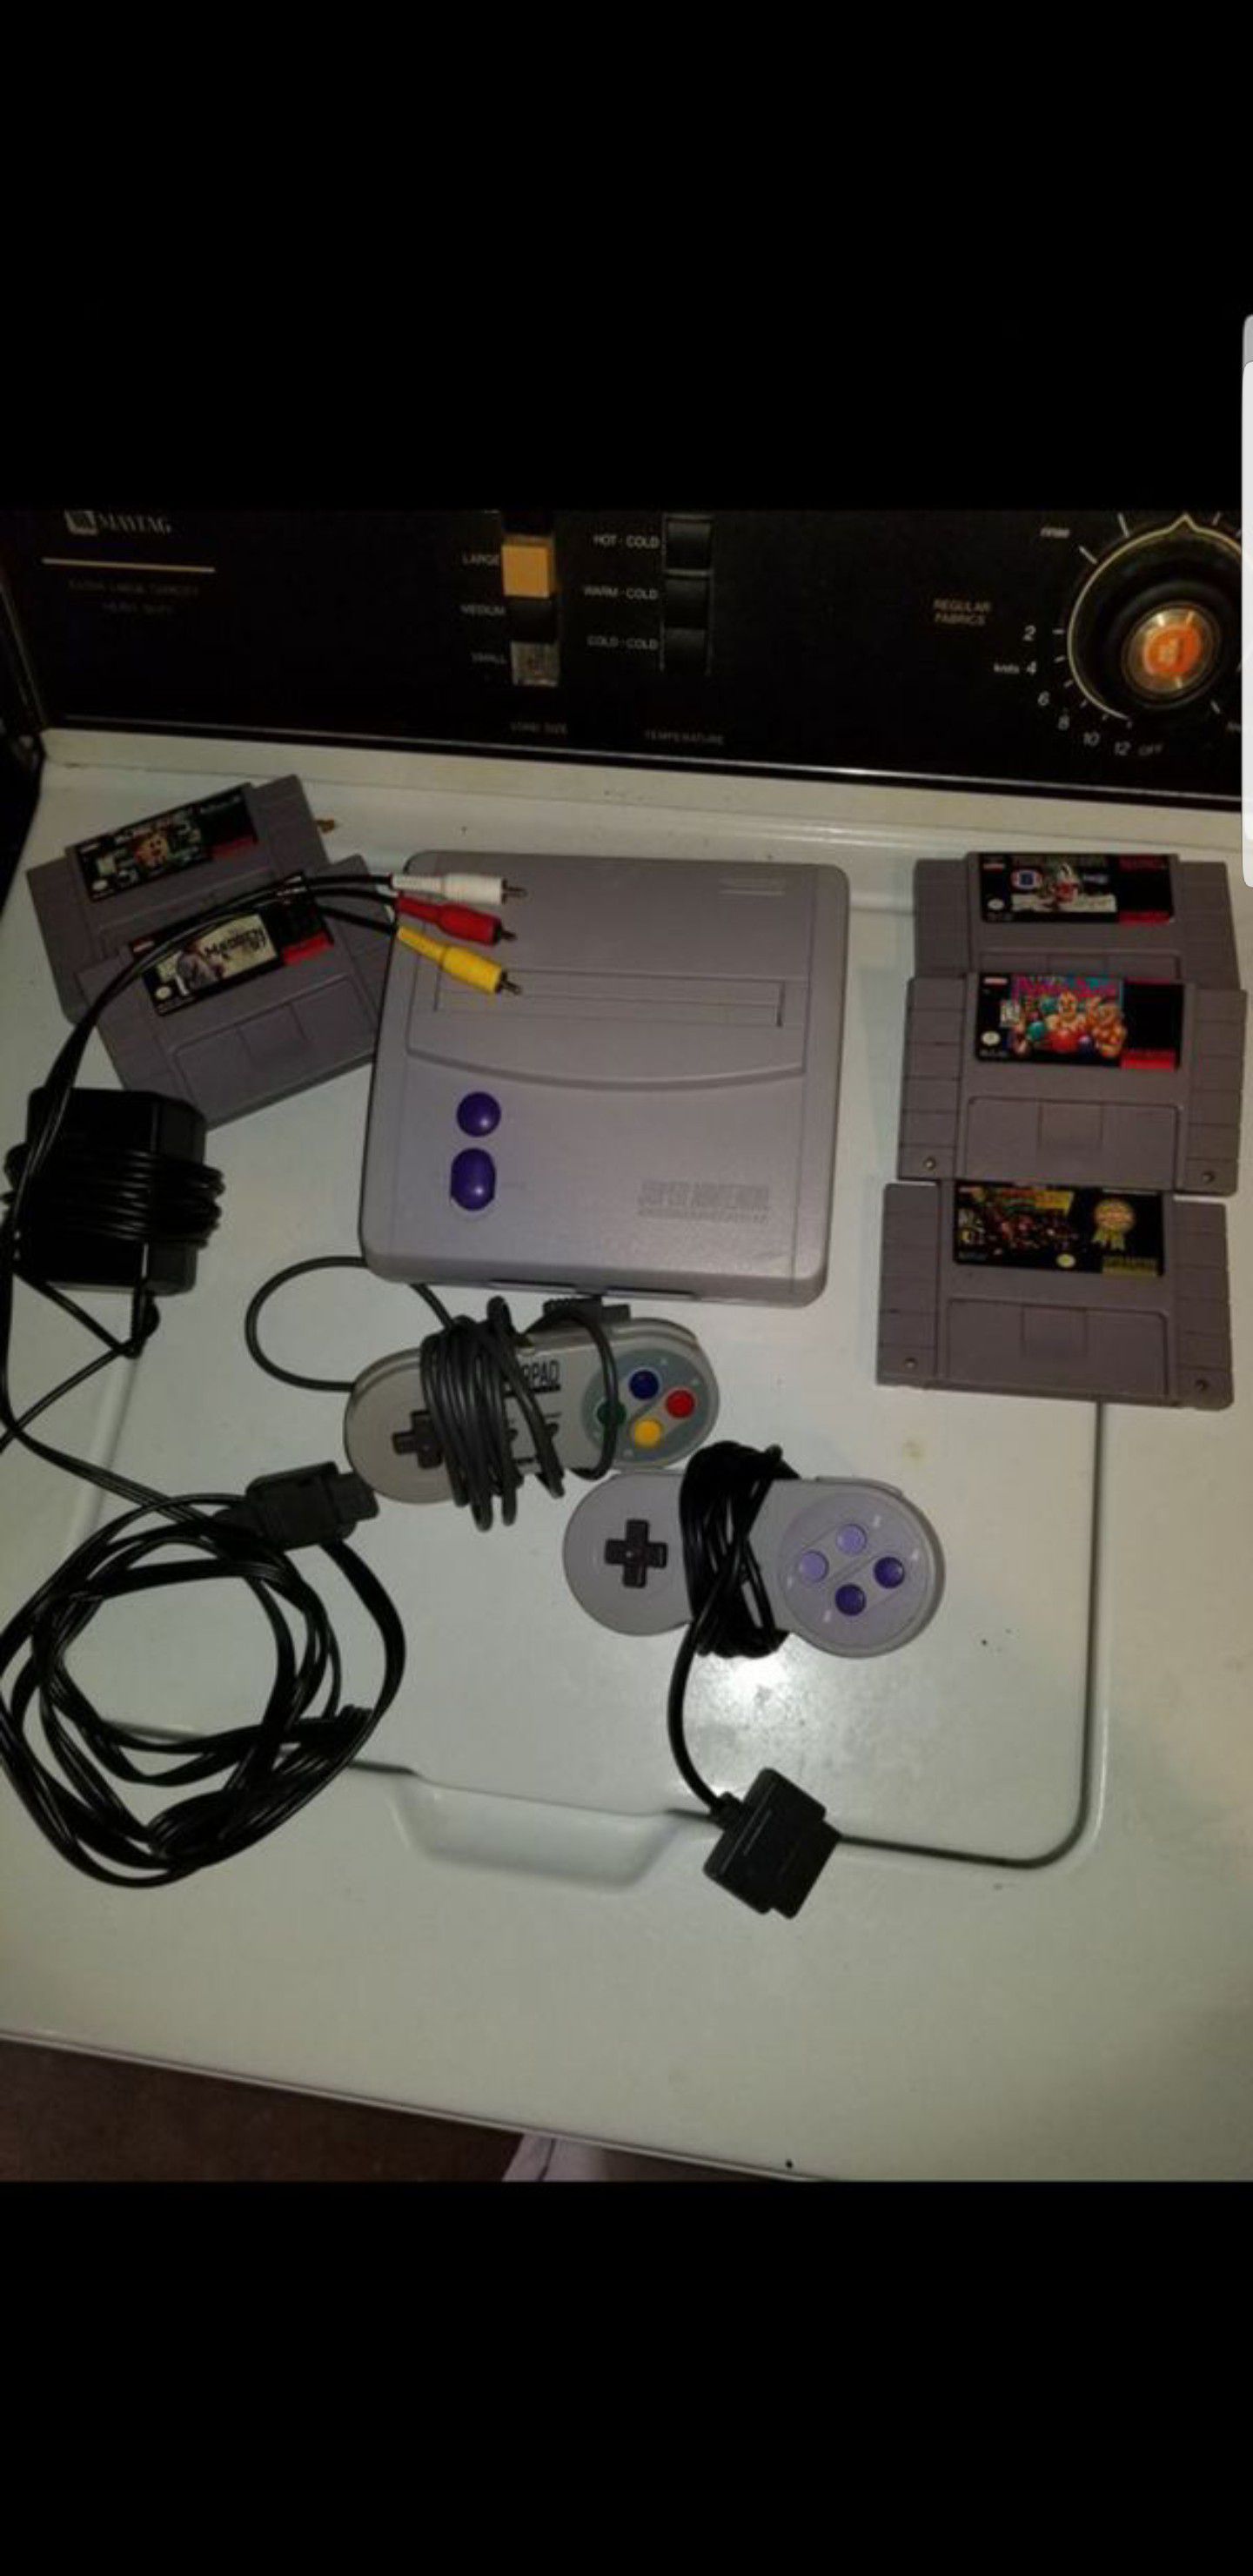 Mike Tyson Punch out, Tecmo bowl, COMPLETE super NINTENDO